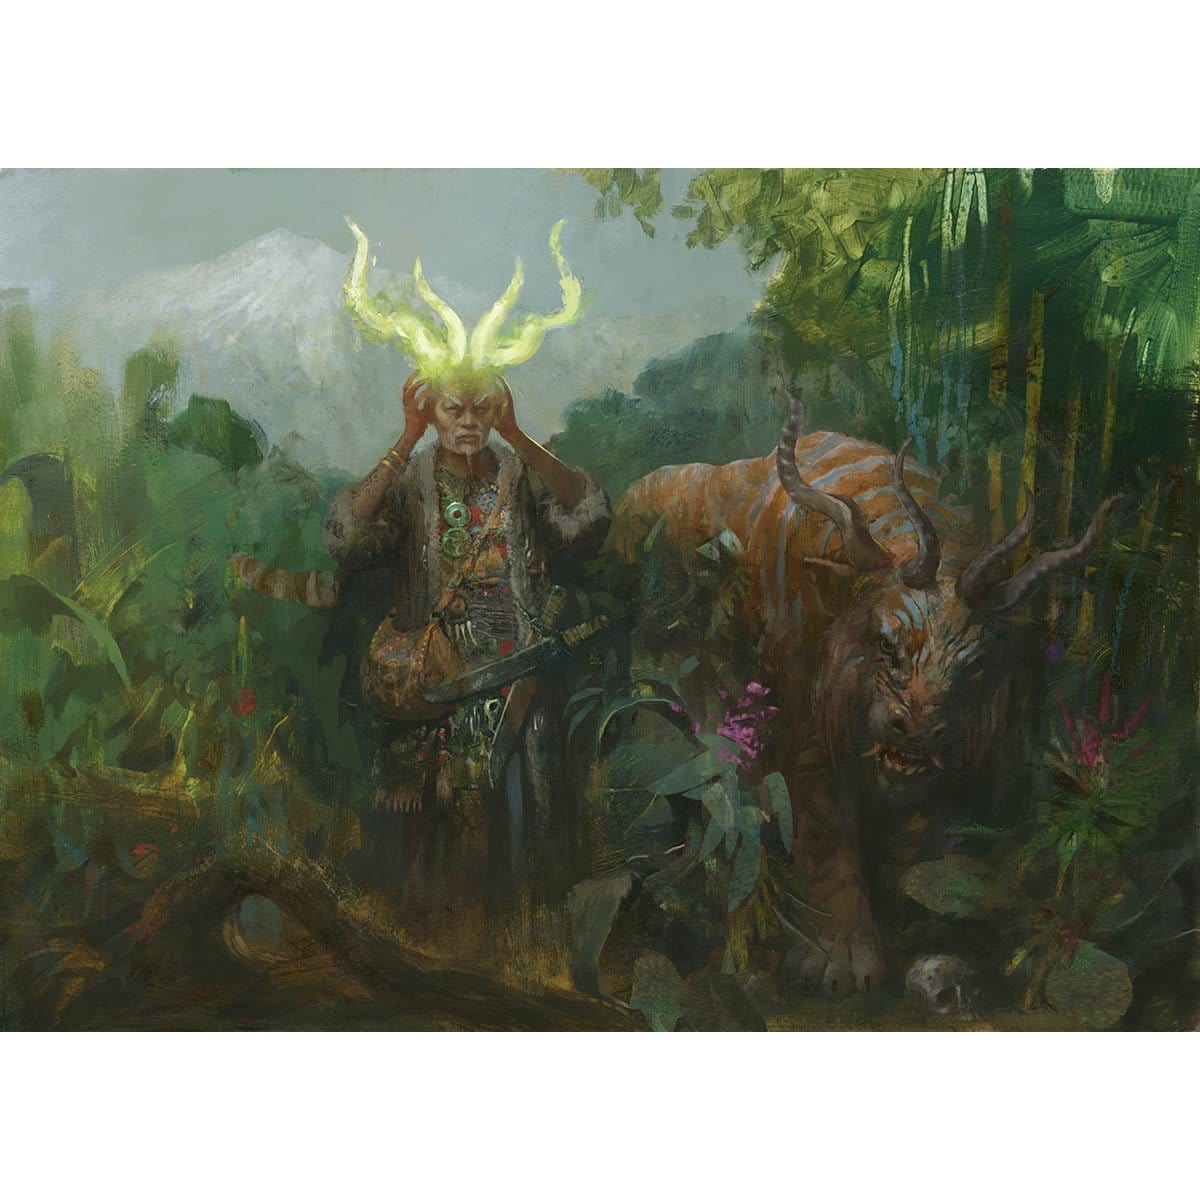 Druid of Horns Print - Print - Original Magic Art - Accessories for Magic the Gathering and other card games